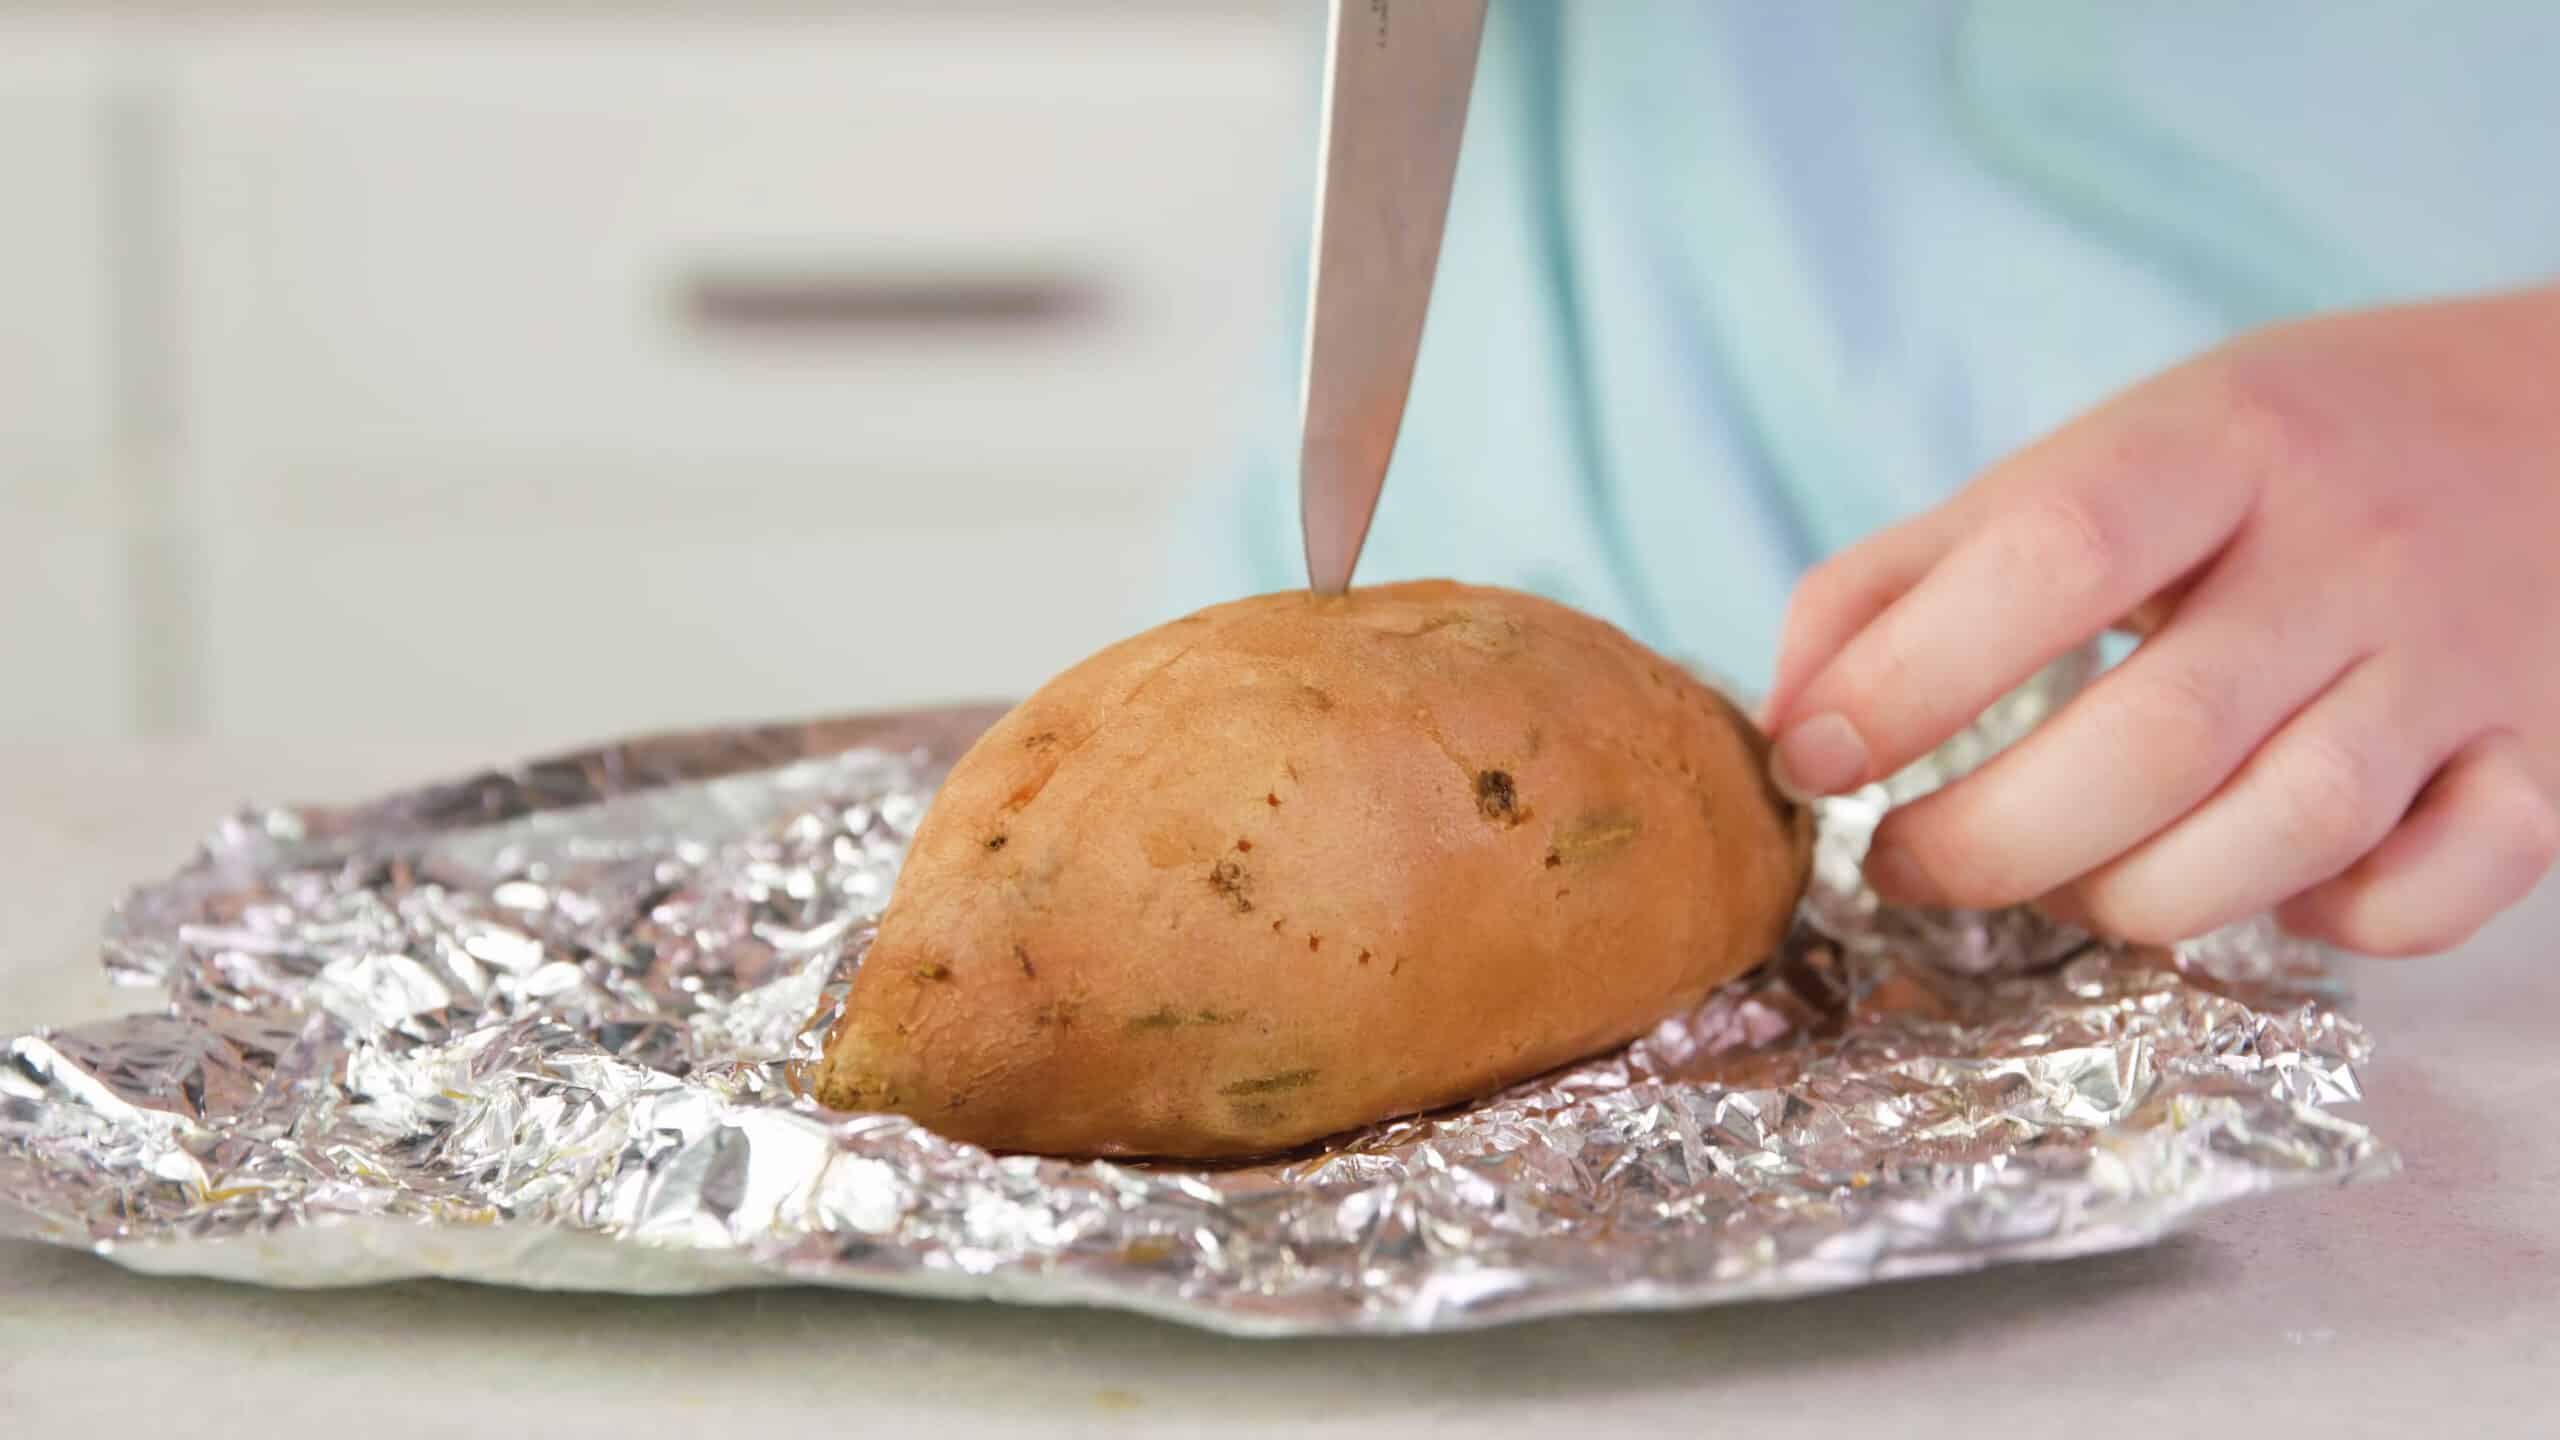 Angled view of one unwrapped baked sweet potato getting sliced down the middle parallel to the ends with a silver kitchen knife.